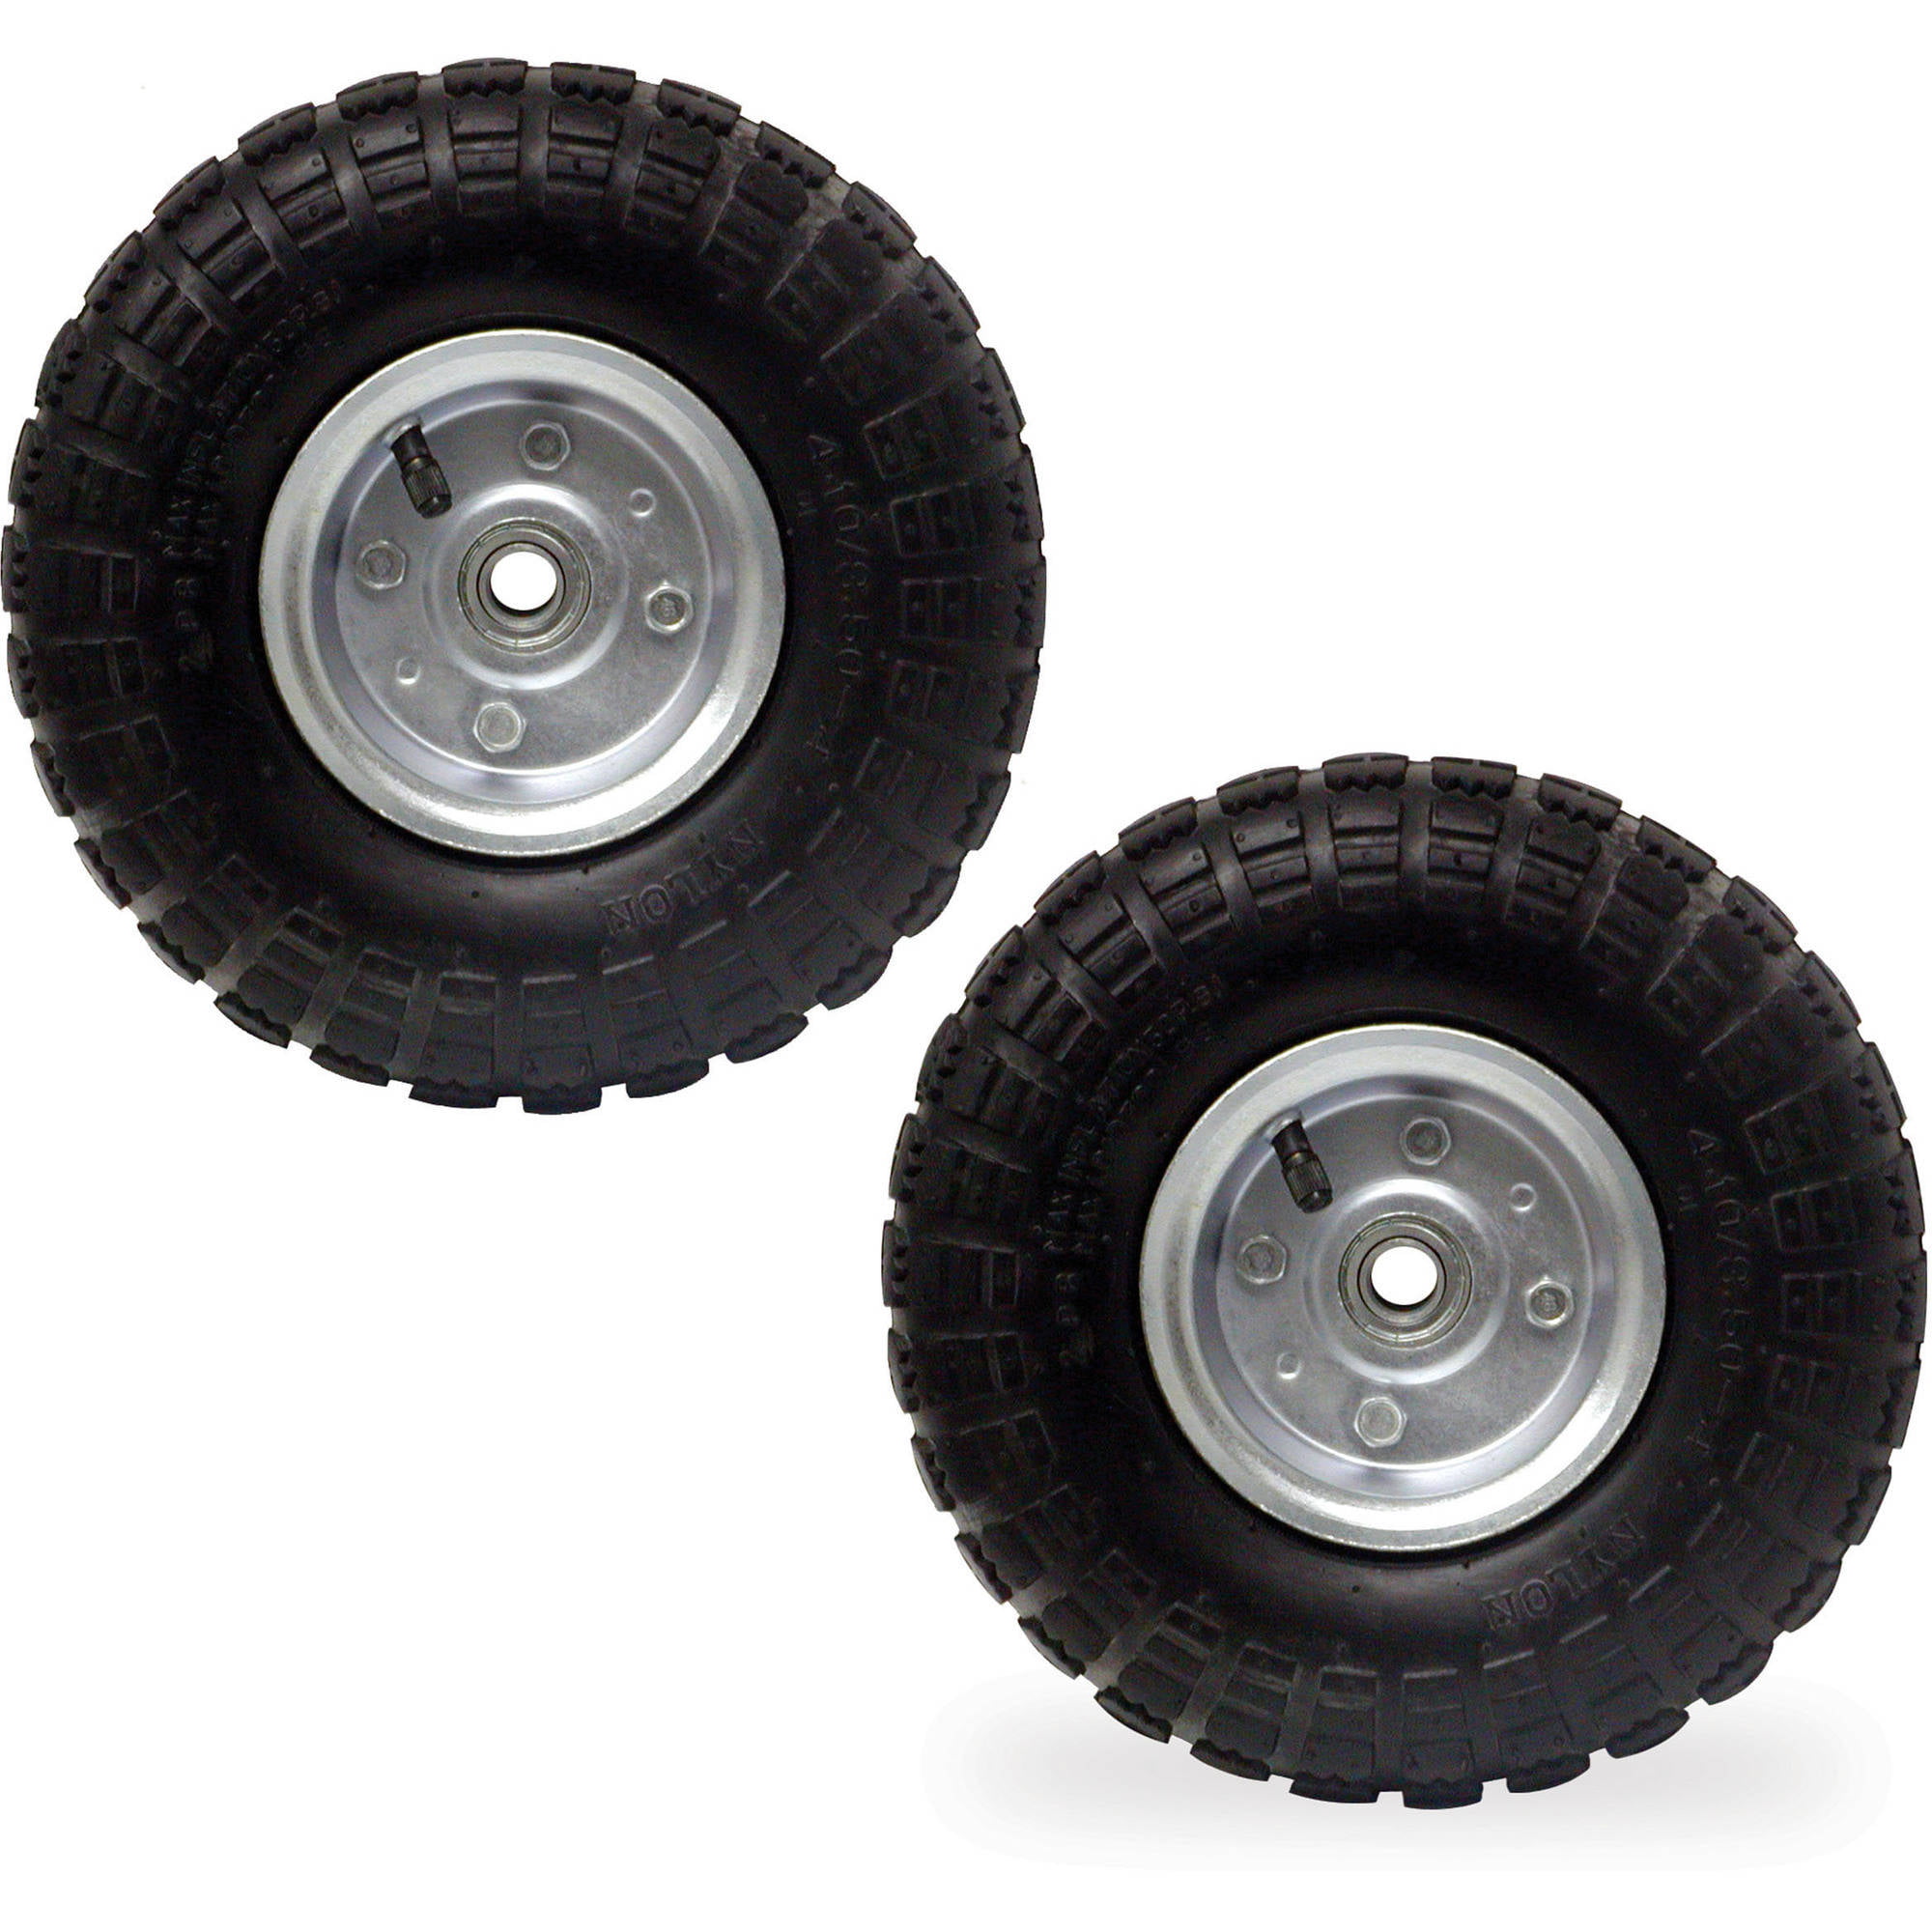 PK OF 2-10" PNEUMATIC SACK TRUCK TROLLEY WHEEL 4.10-4 CHOOSE YOUR BORE SIZE 